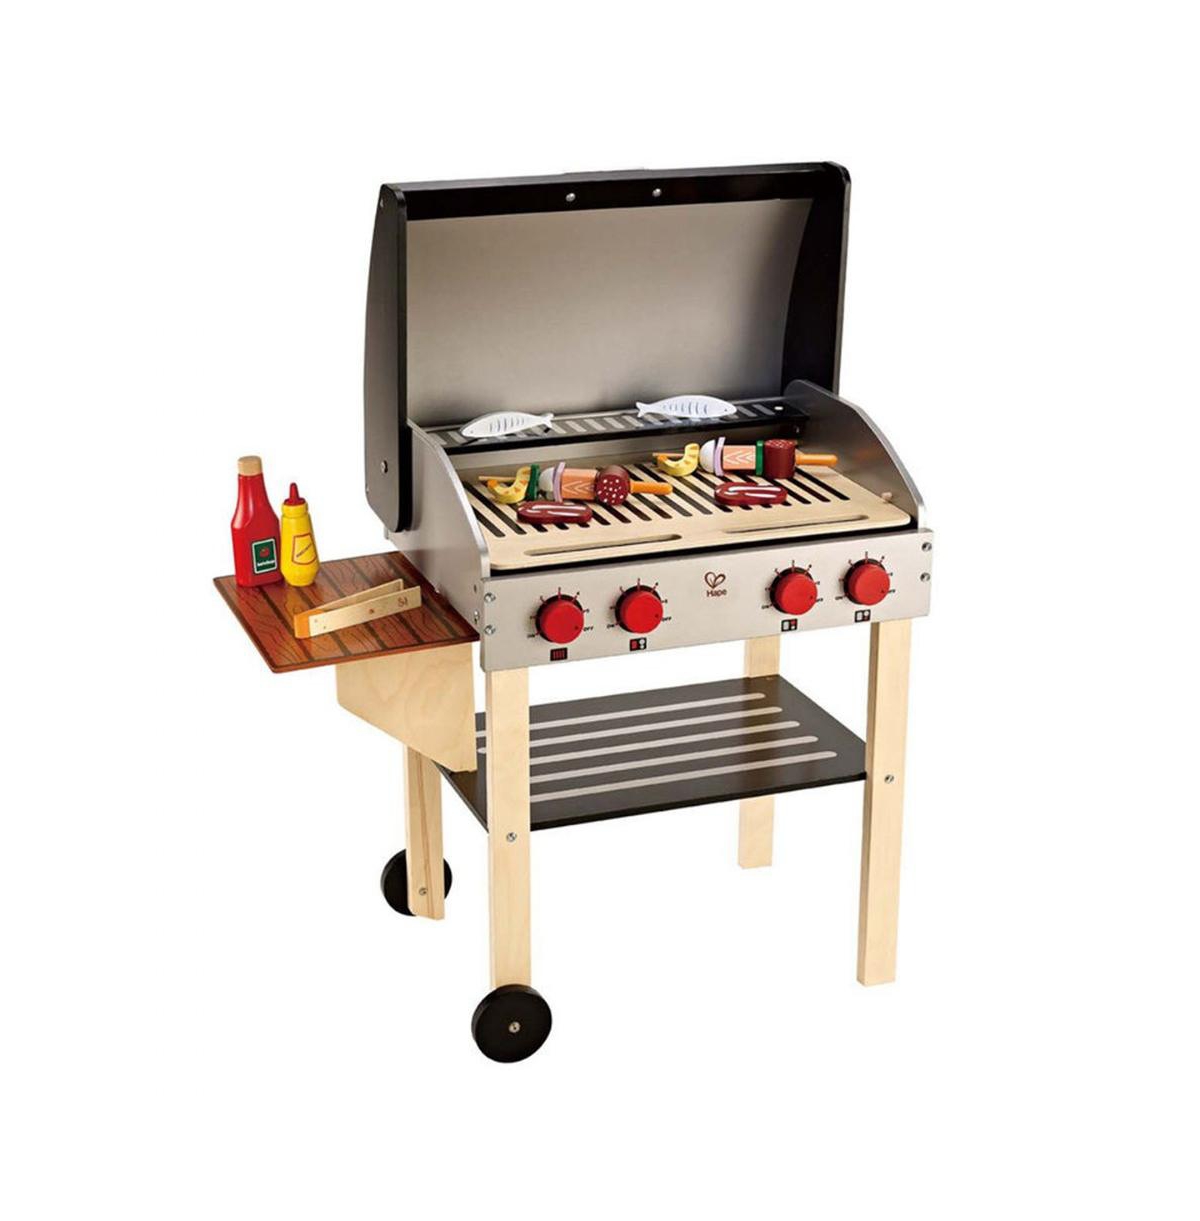 Hape Kids' Wooden Gourmet Grill And Shish Kabob Play Kitchen In Multicolored